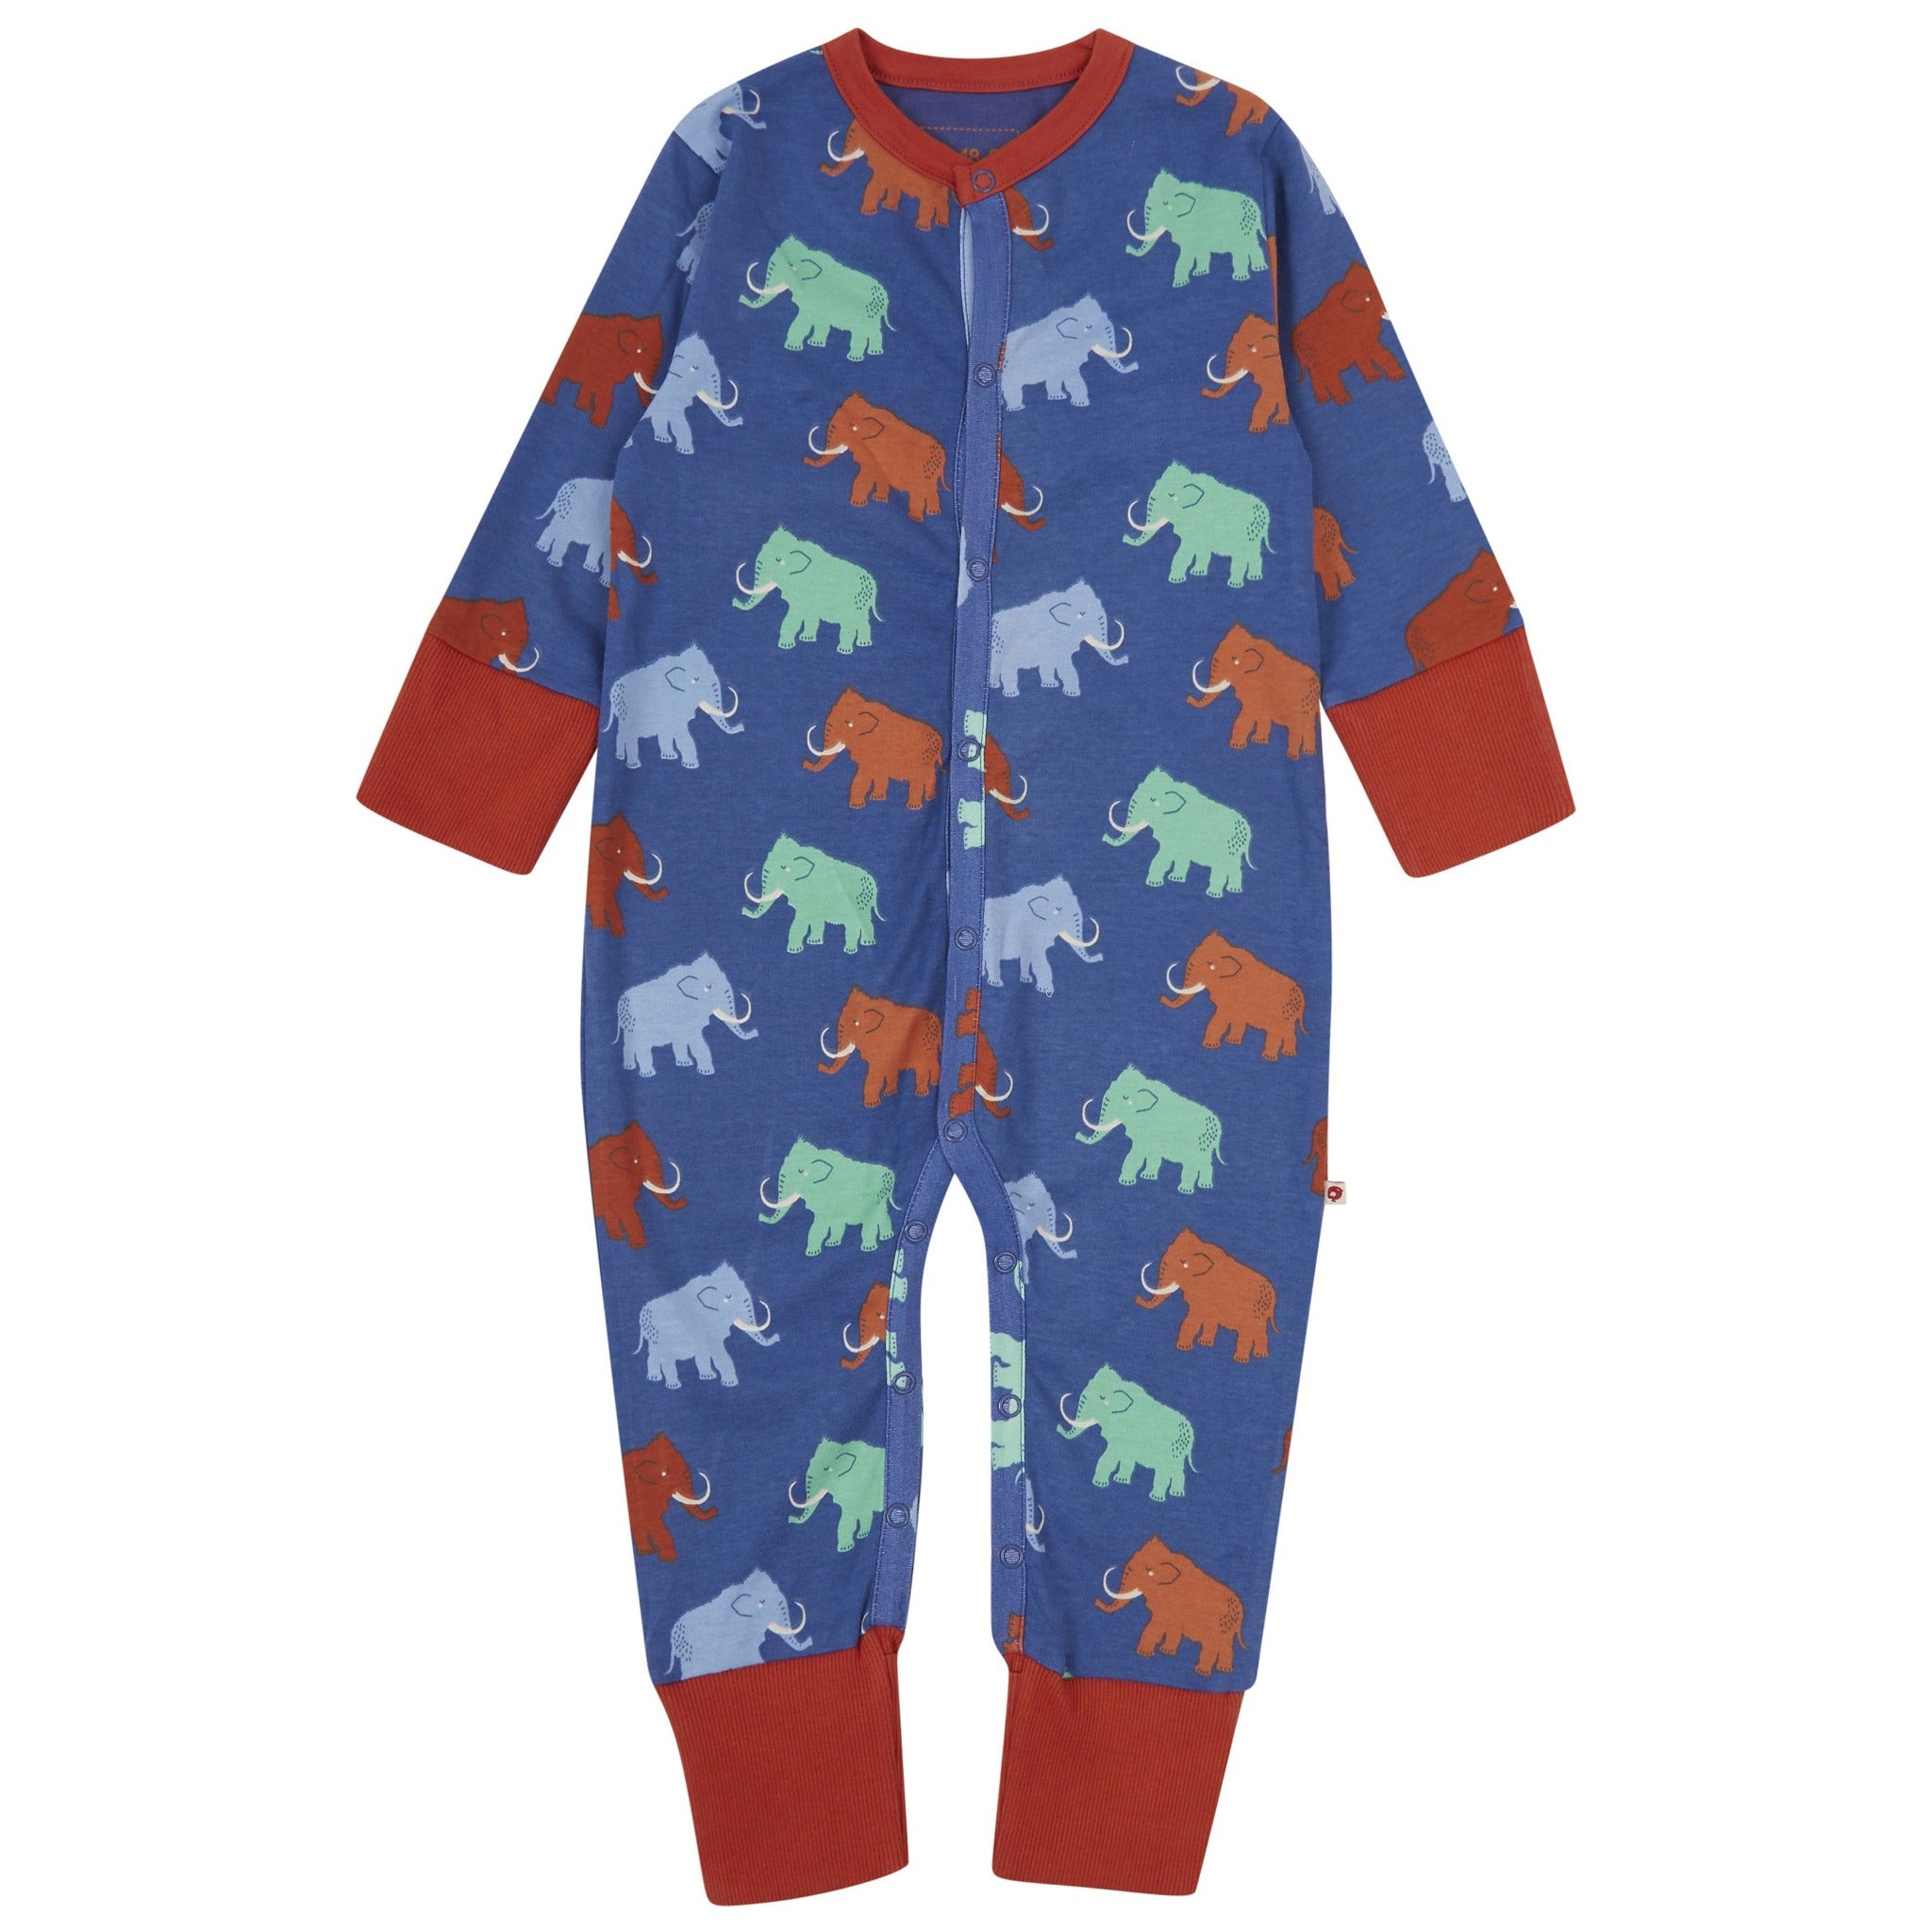 Piccalilly romper- mammoth